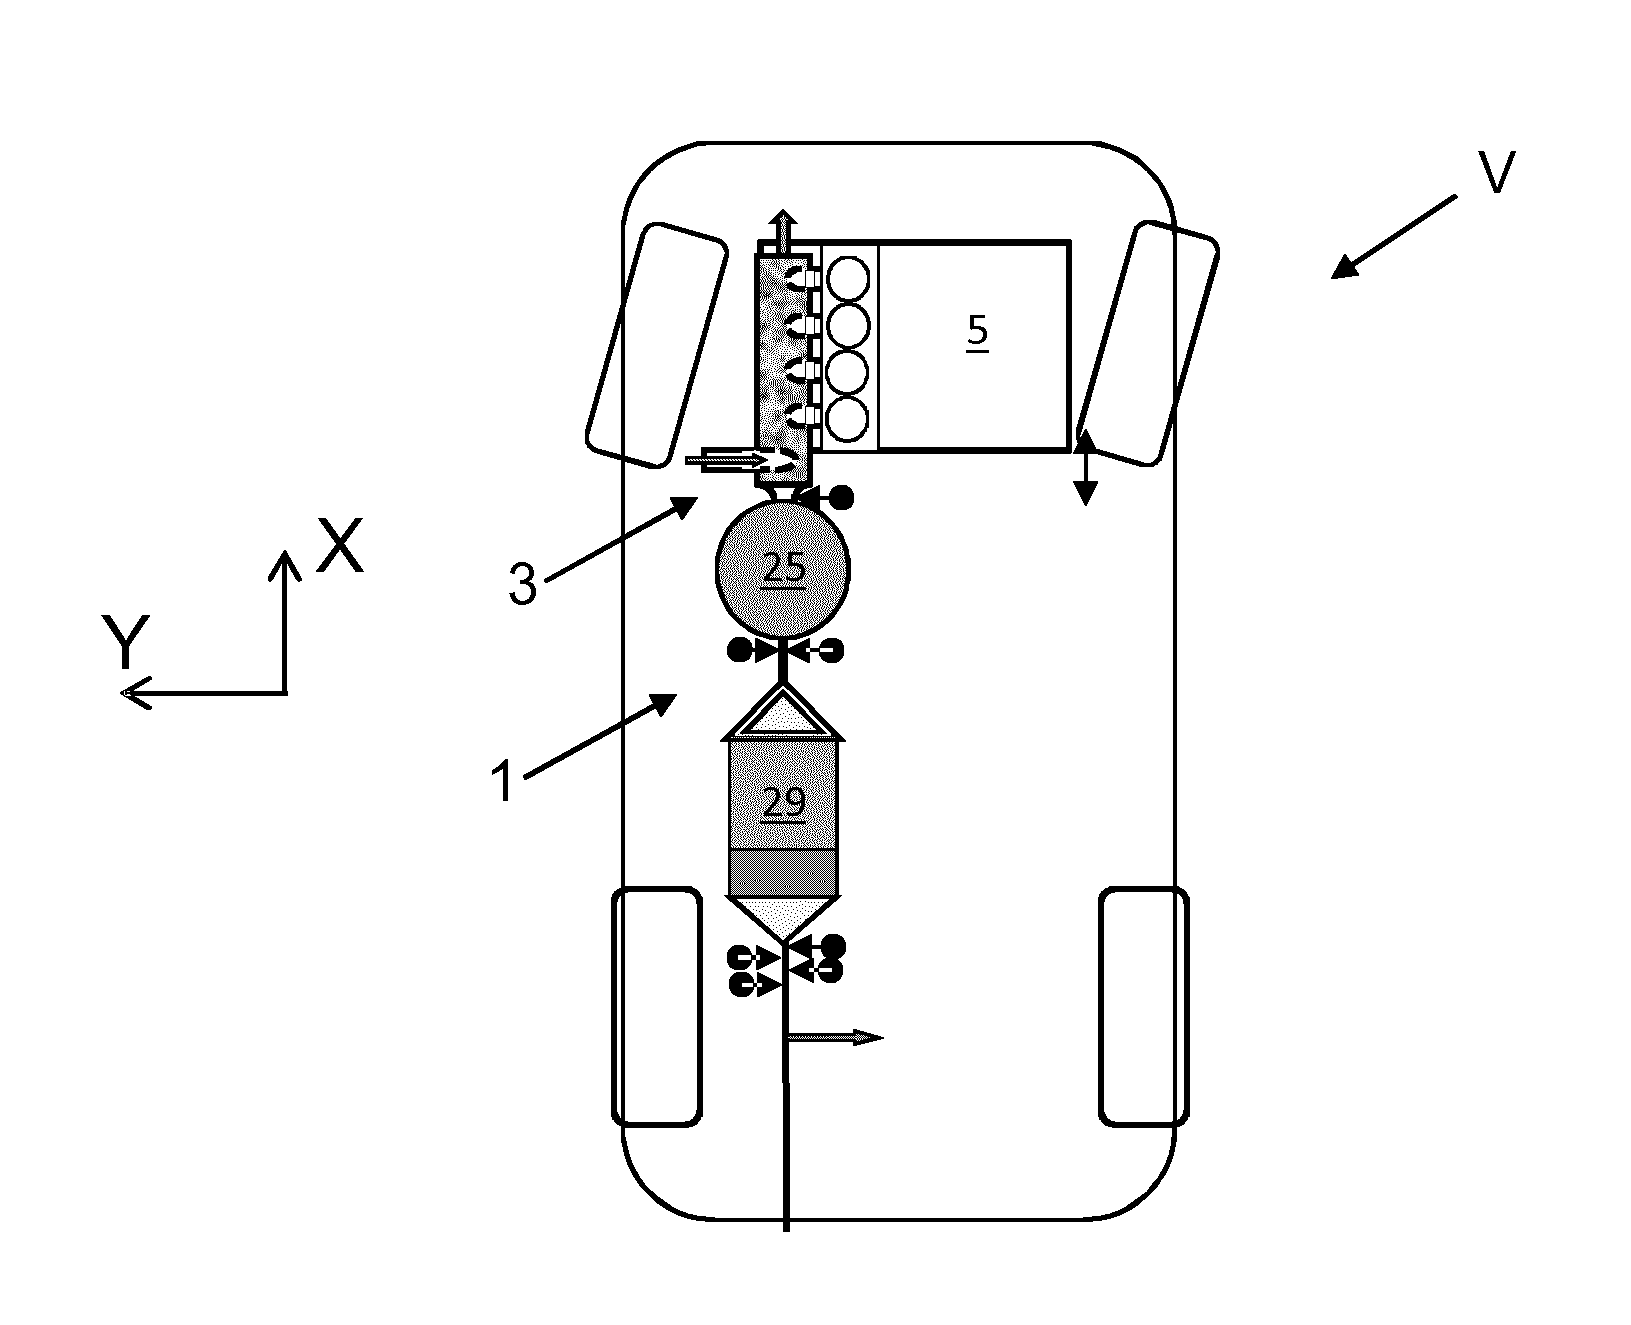 Exhaust treatment apparatus and method